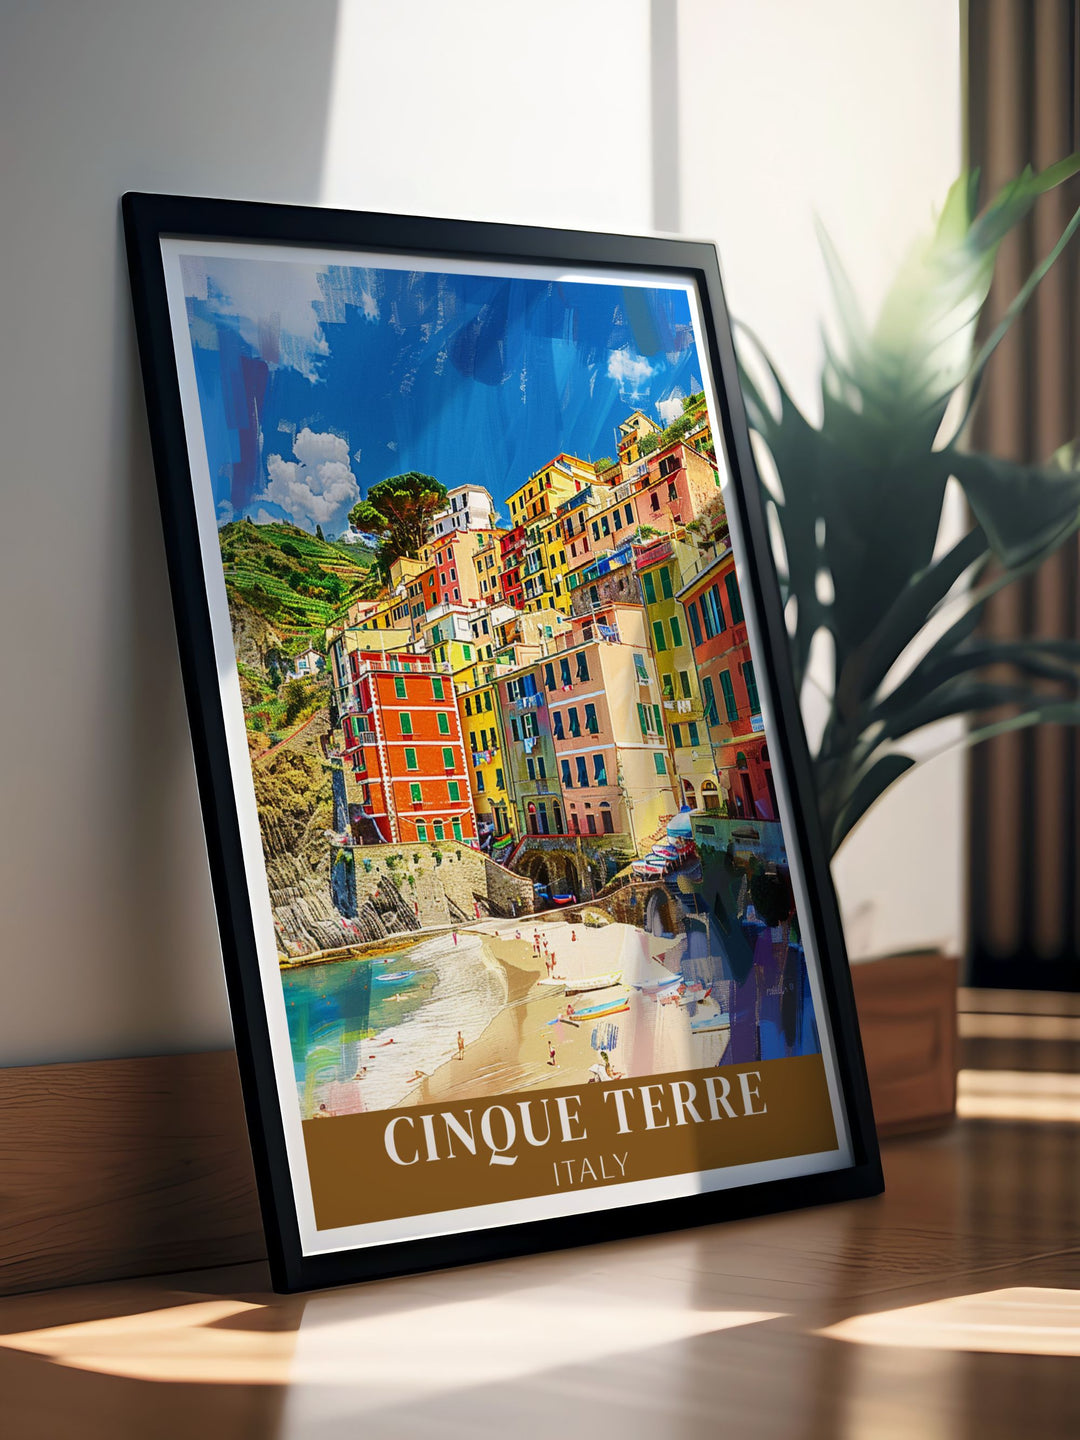 Monterosso al Mare photo capturing the essence of Cinque Terre a stunning piece of wall art that brings the charm and beauty of this iconic Italian village to your living space perfect for colorful art enthusiasts.